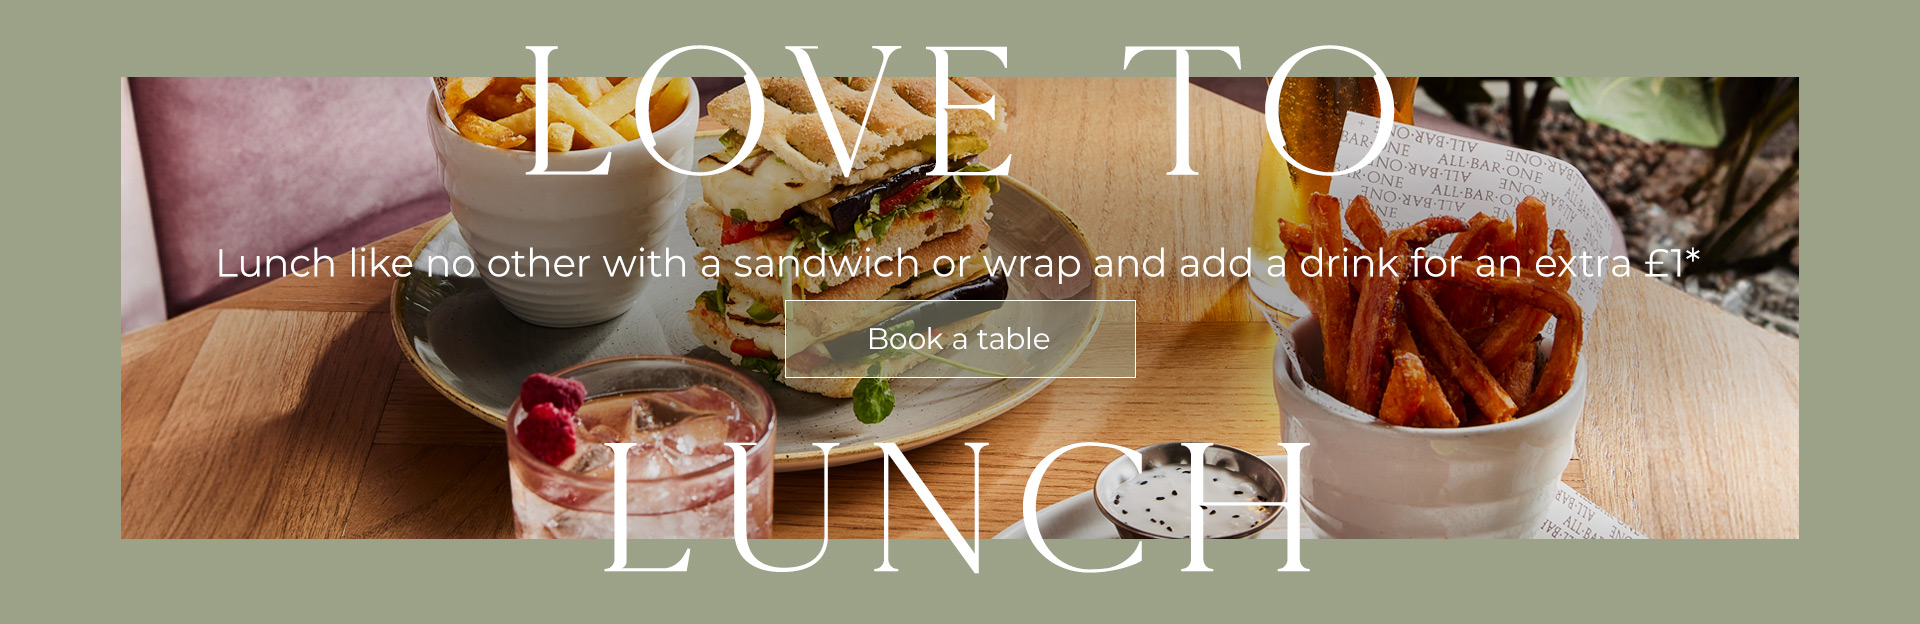 Lunch Offer at All Bar One Charing Cross